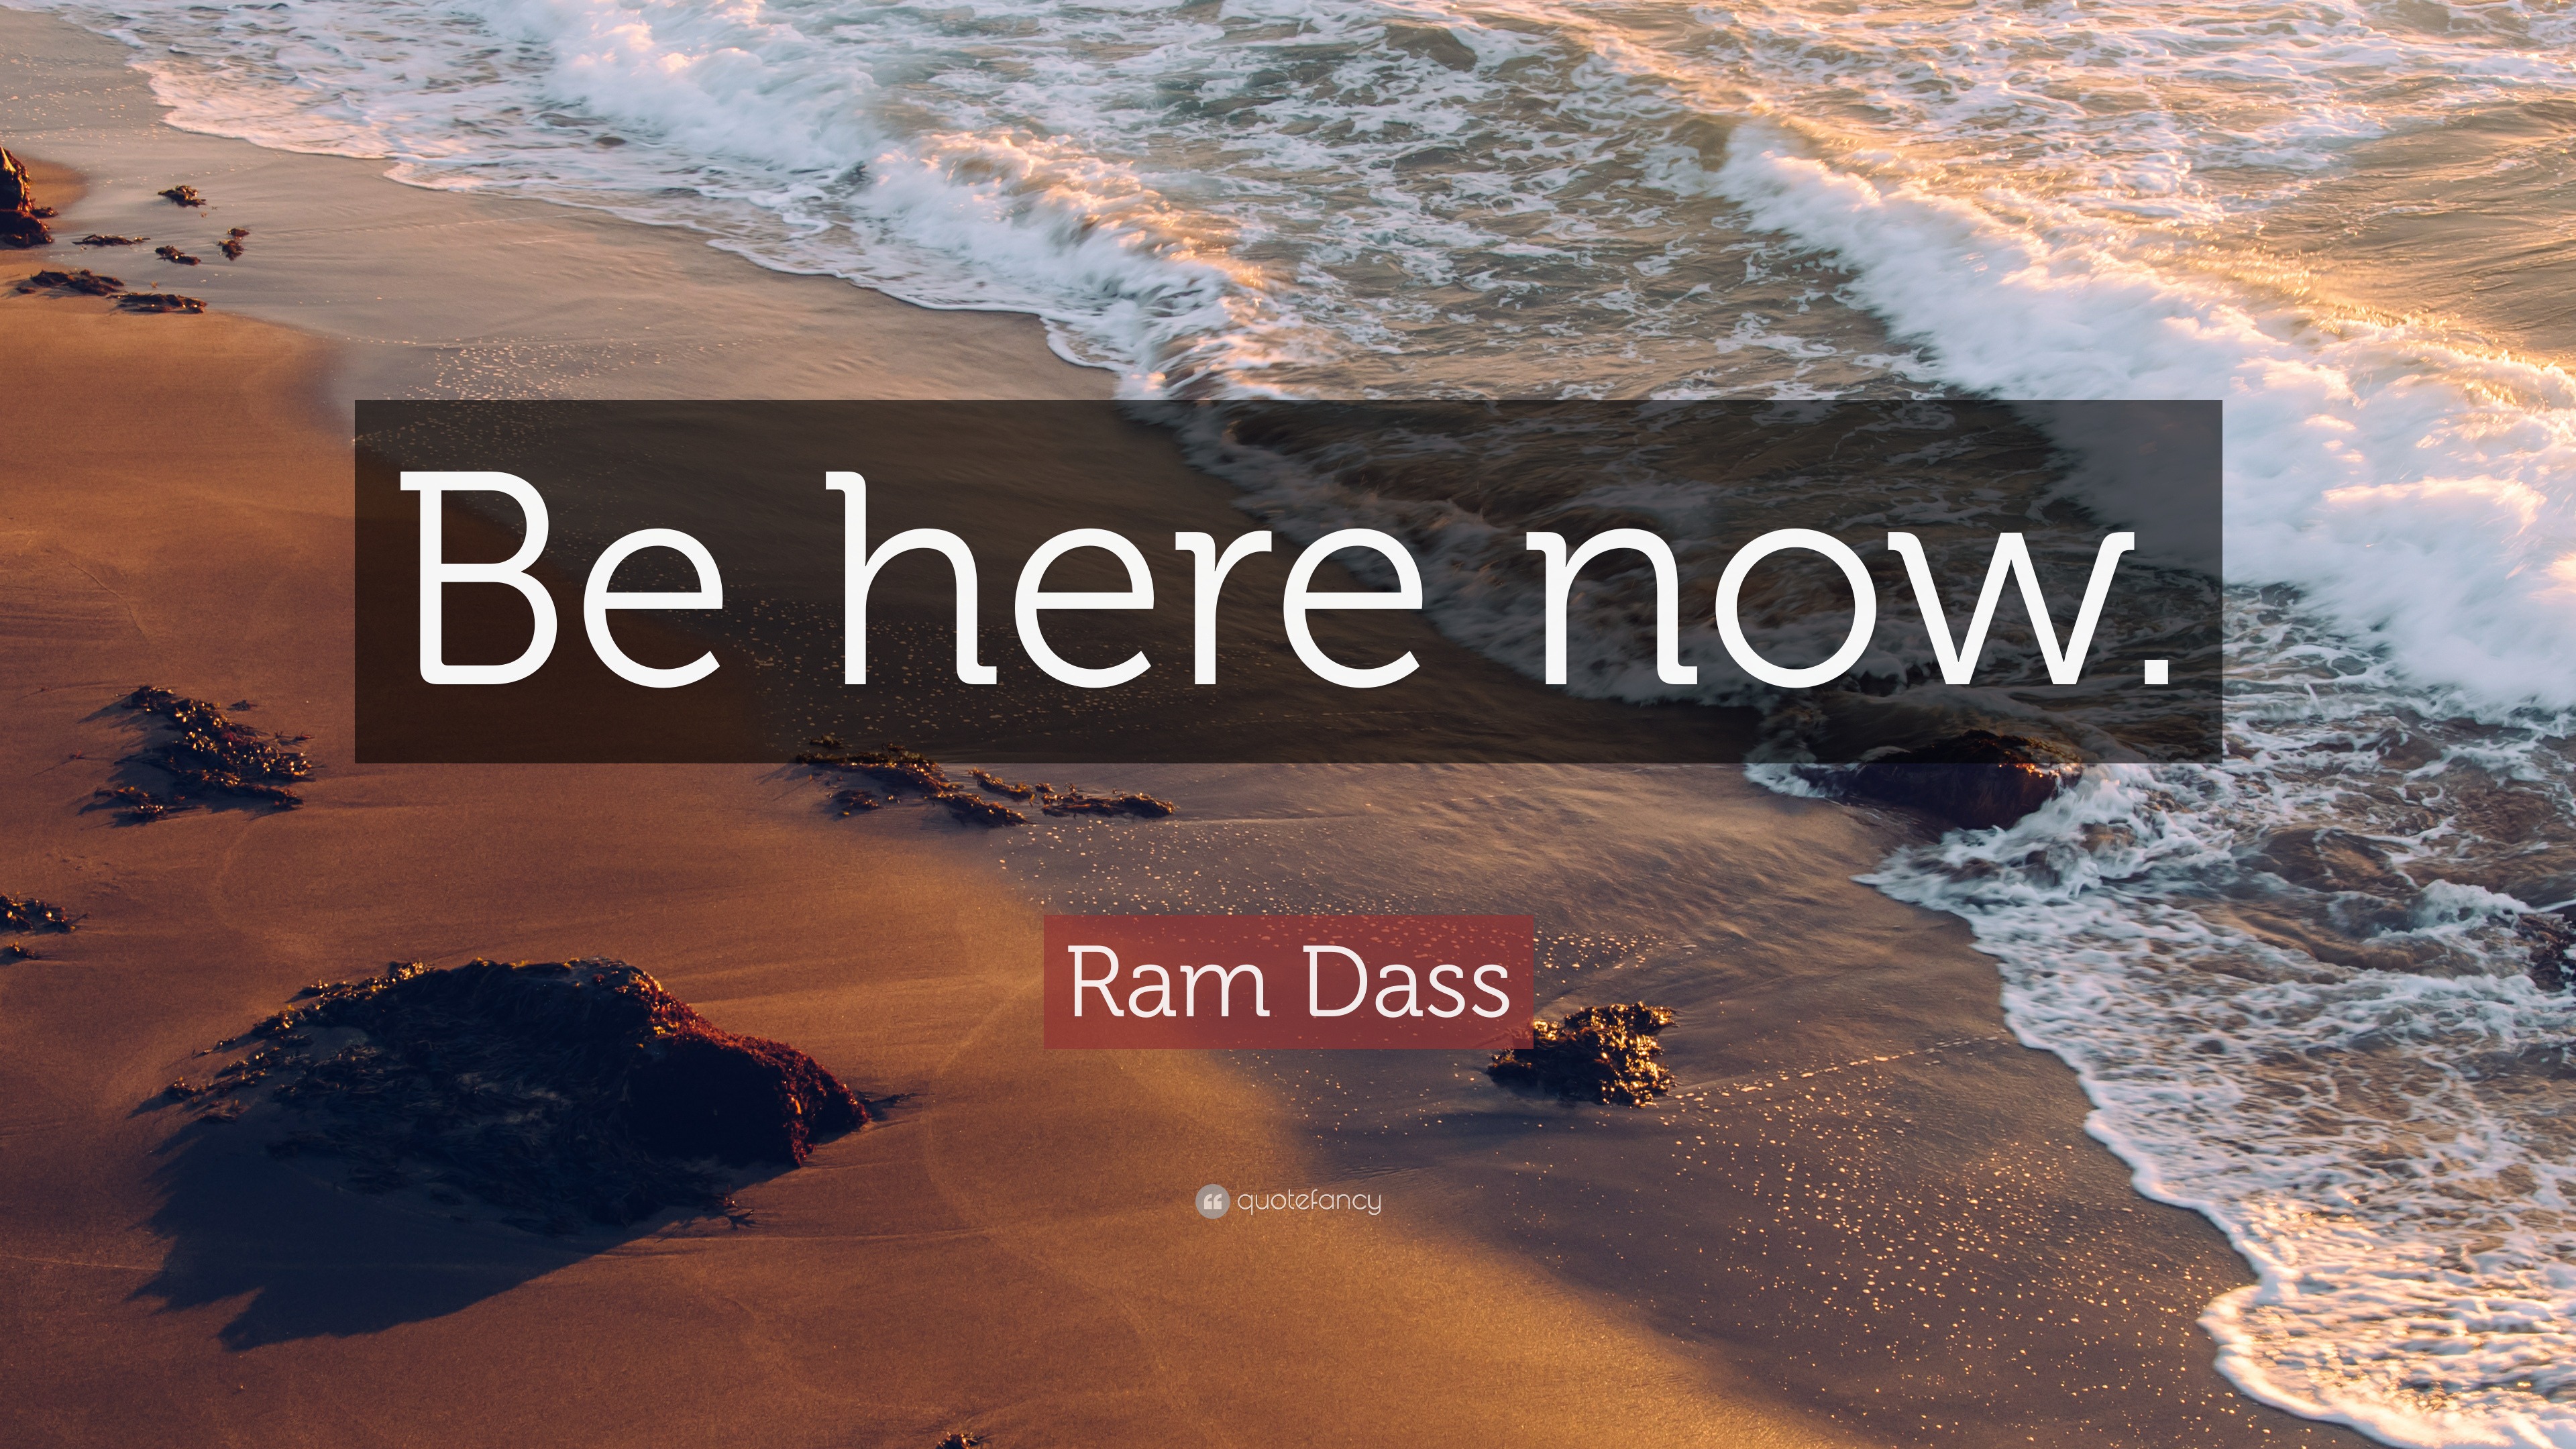 ram dass remember be here now